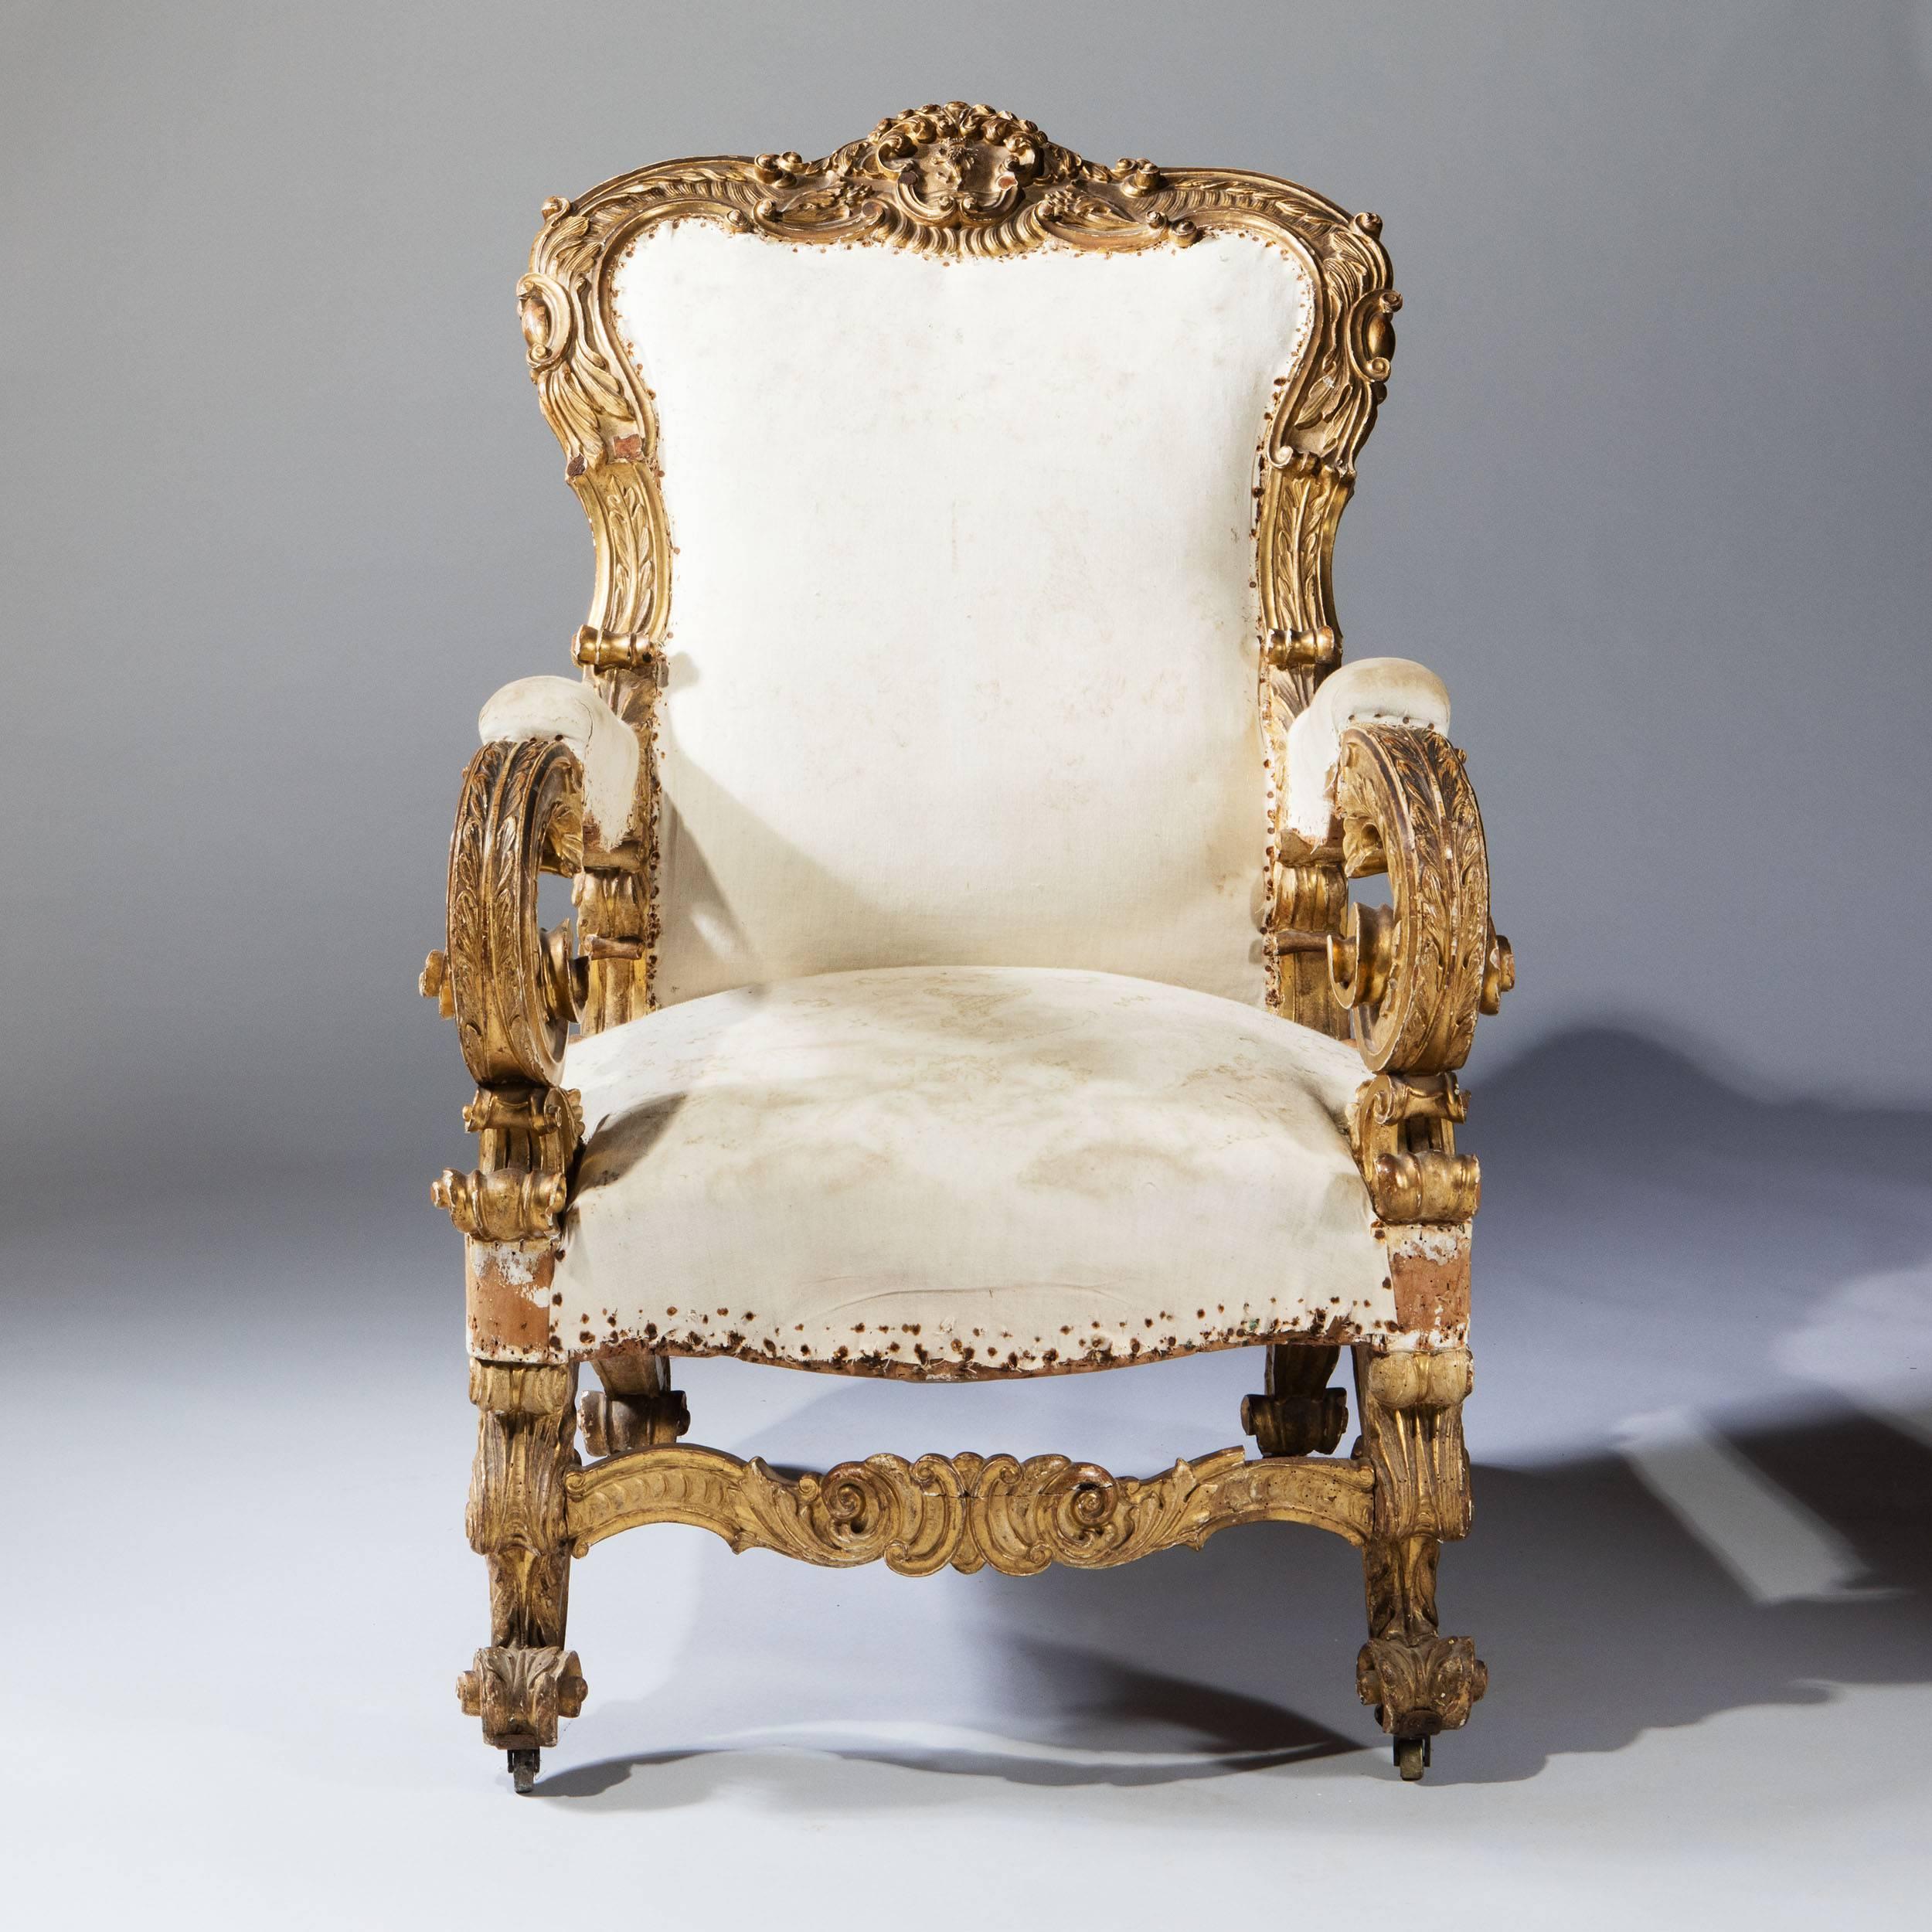 Northern Italy, circa 1780

A substantial North Italian 18th century giltwood Throne Chair in original condition. The overscale frame richly carved with neoclassical and exaggerated Baroque ornament, substantial scrolled arms and legs, the front